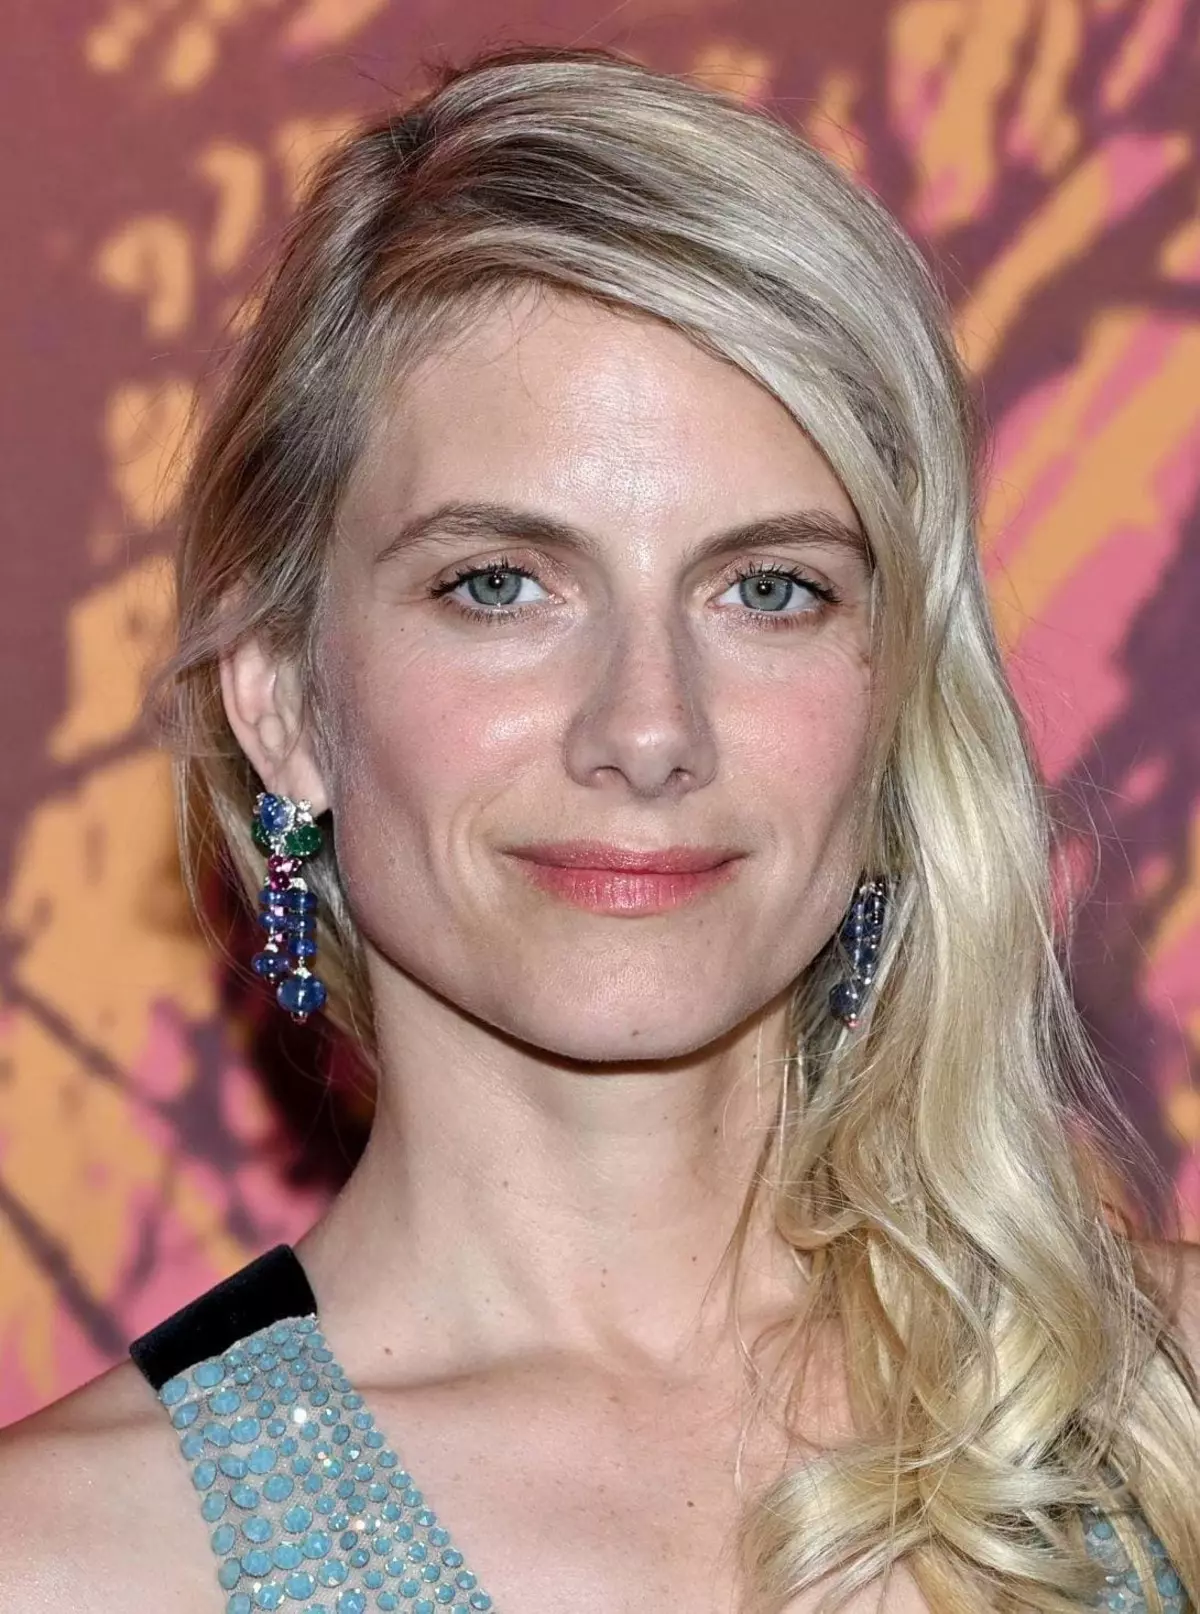 Melanie Laurent - Biography, Personal Life, Photo, News, Films, Filmography, French Actress, in Swimsuit 2021